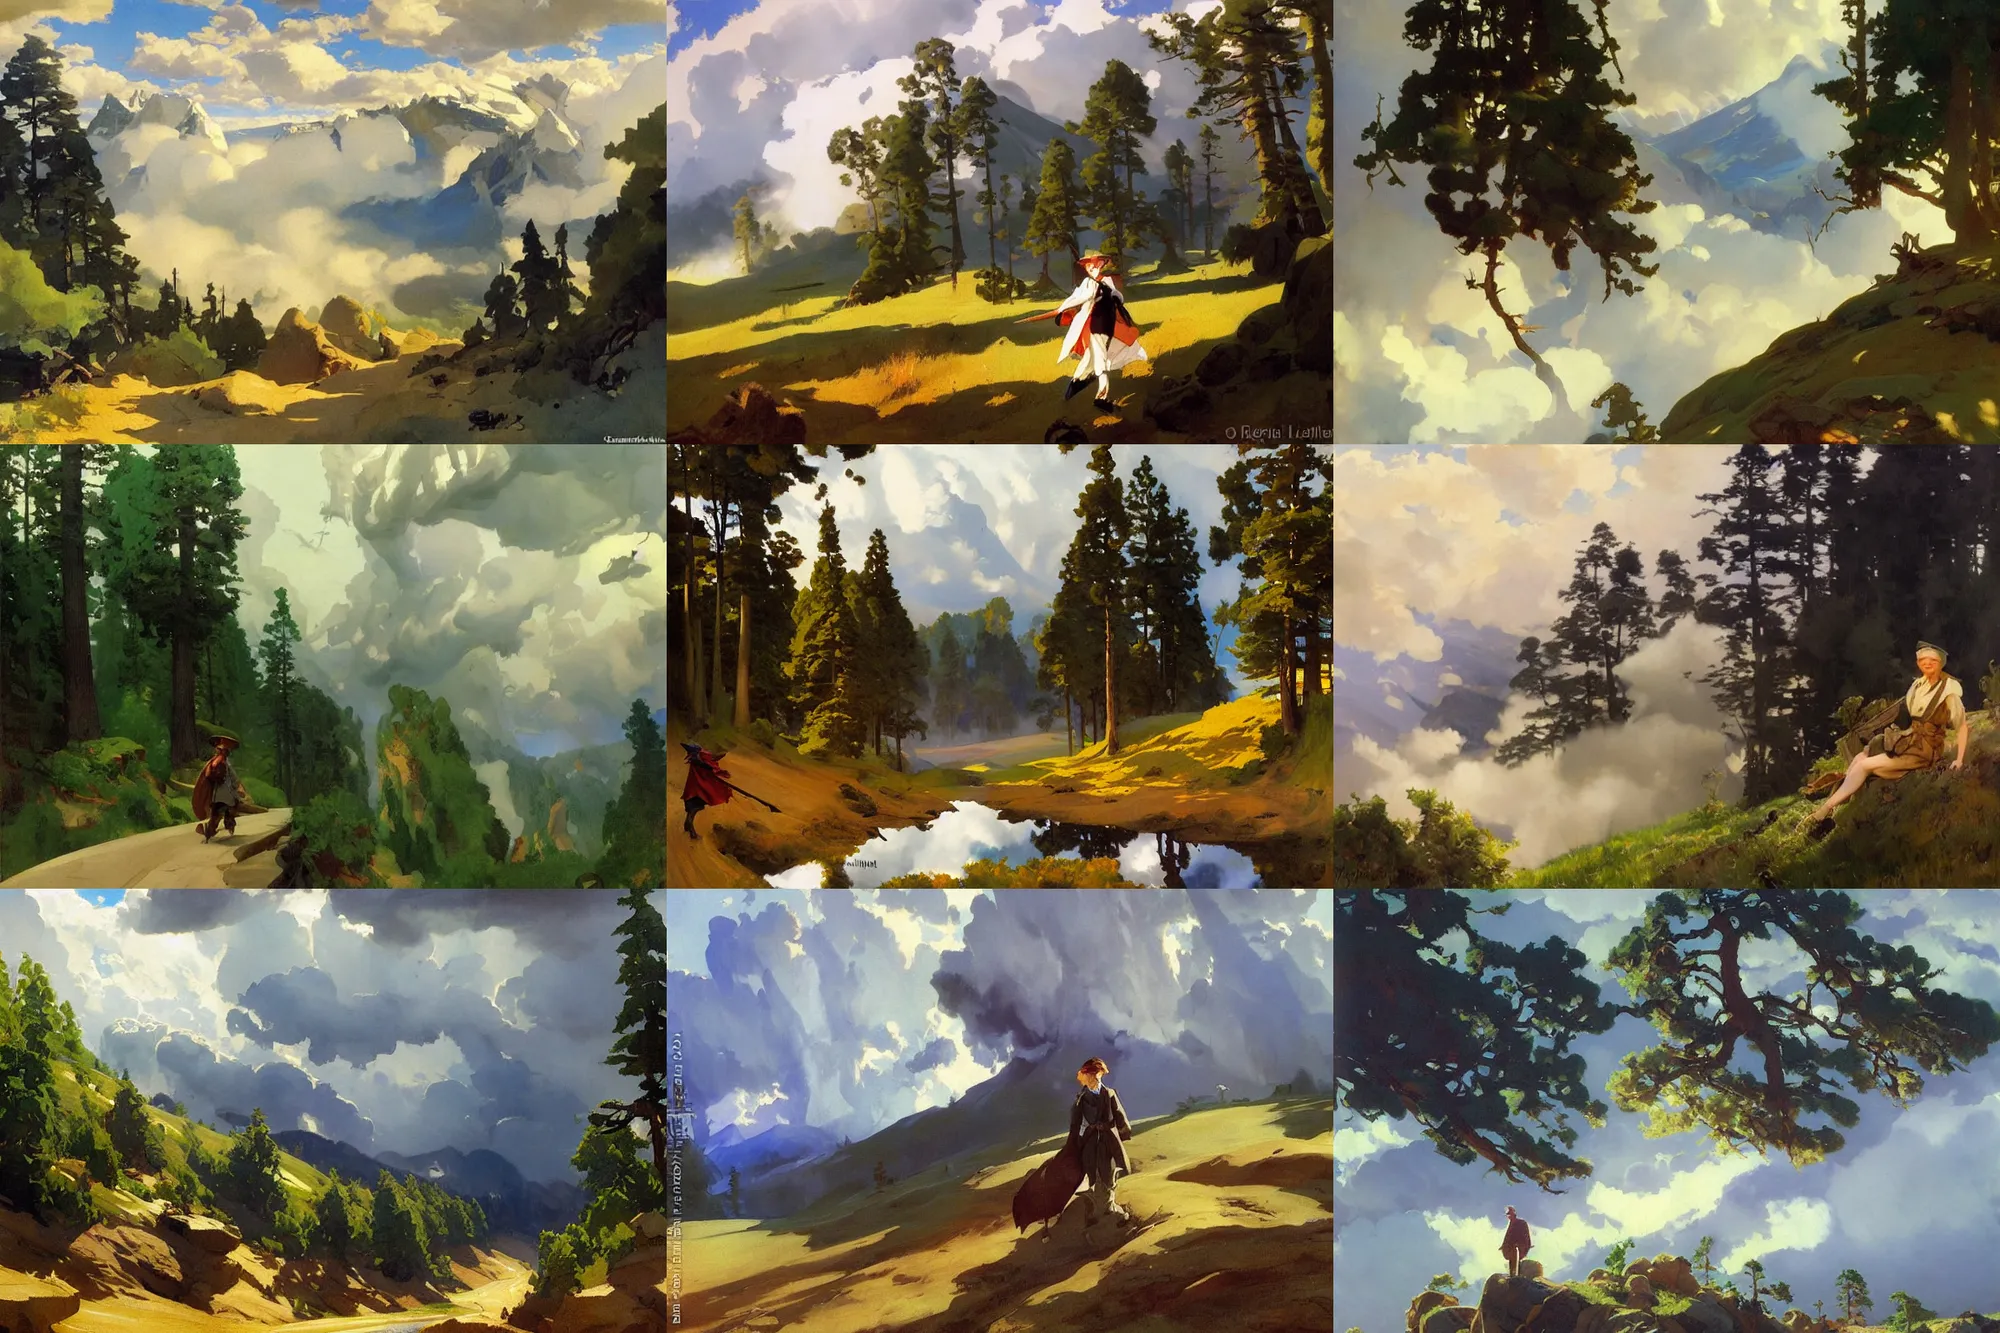 Prompt: painting by sargent and leyendecker and greg hildebrandt savrasov levitan polenov, studio ghibly style mononoke, middle earth above the layered low clouds road between forests trees river lakes stones overcast storm masterpiece